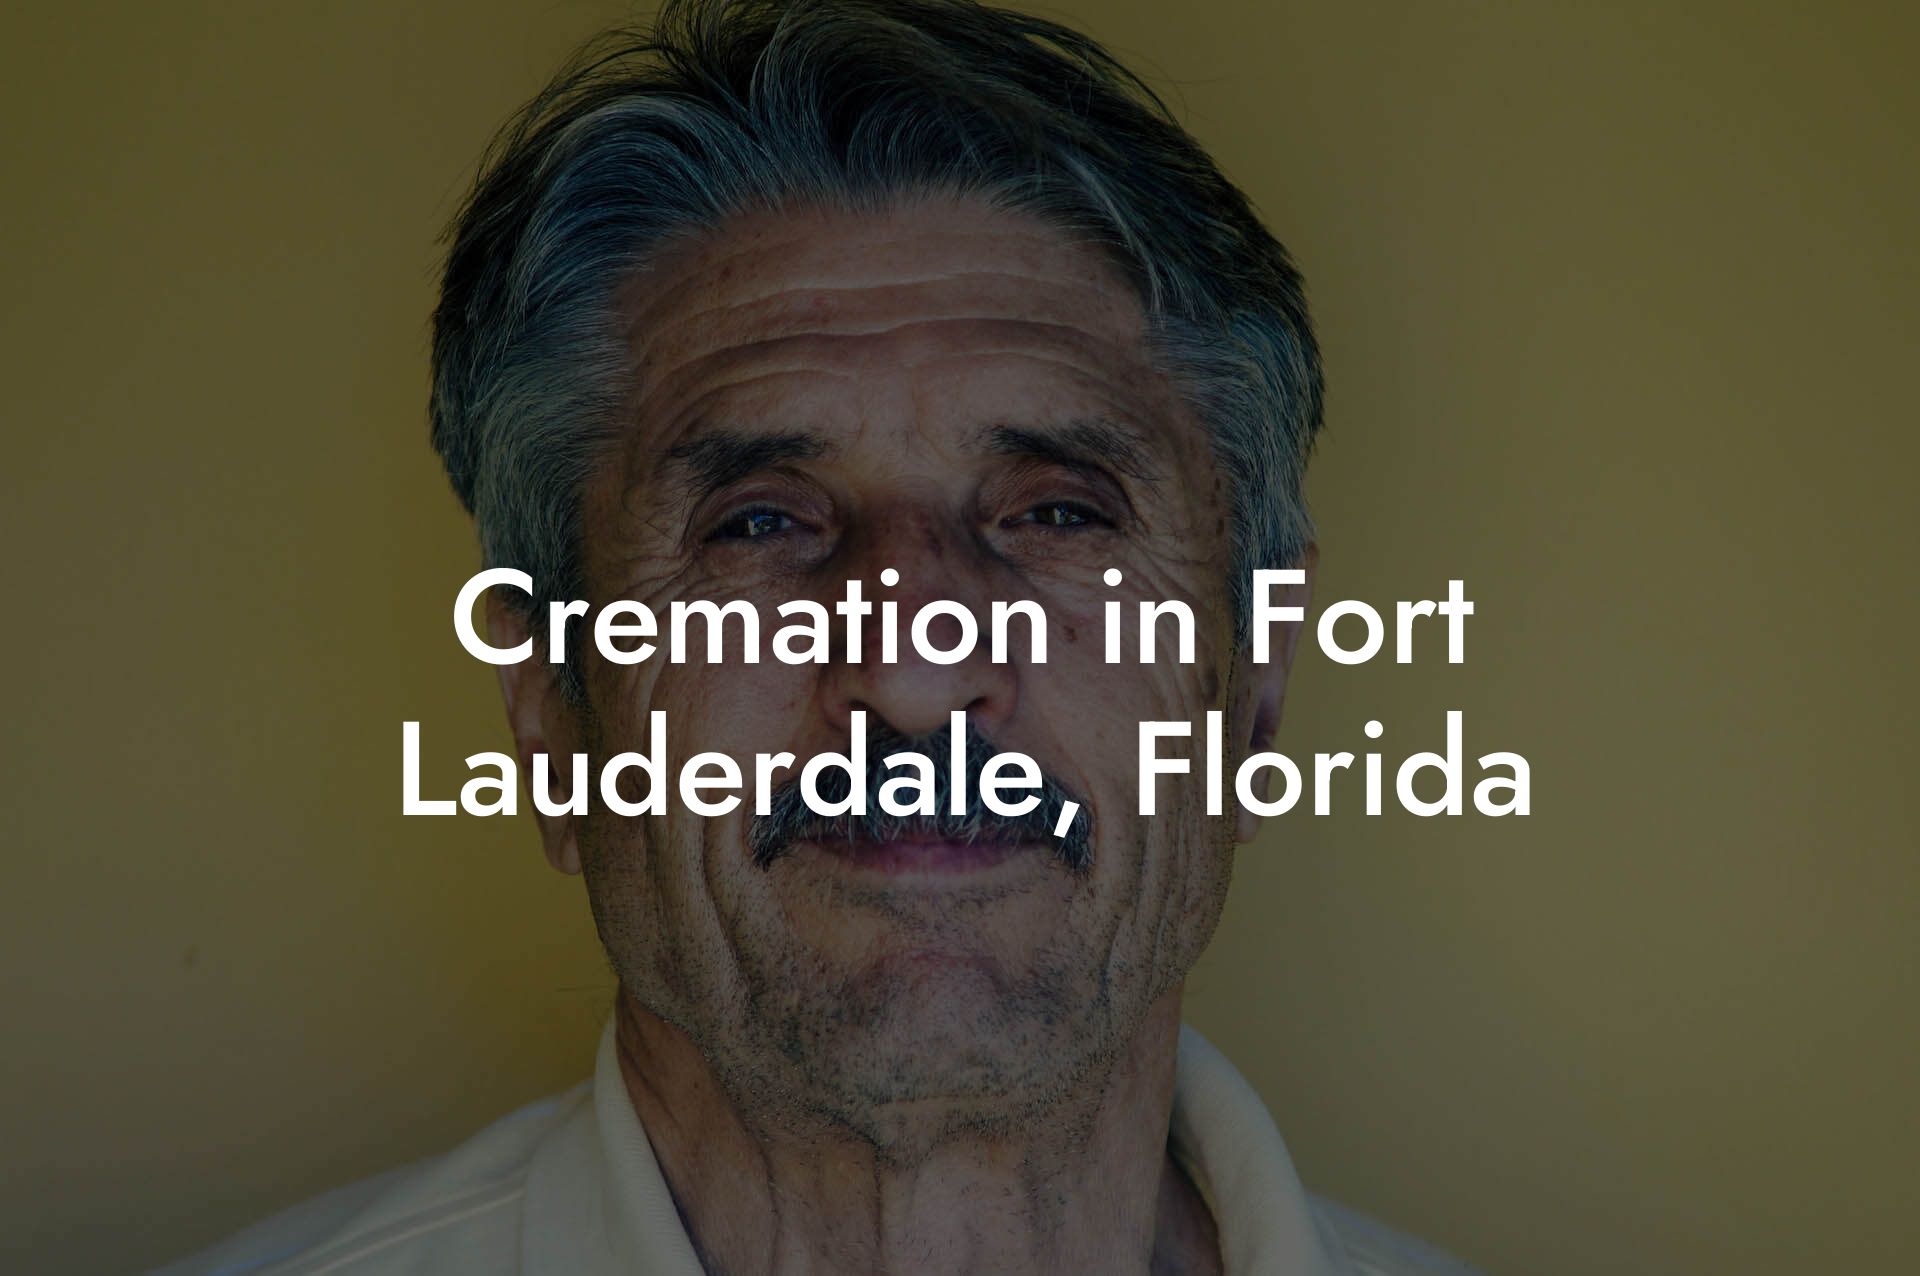 Cremation in Fort Lauderdale, Florida